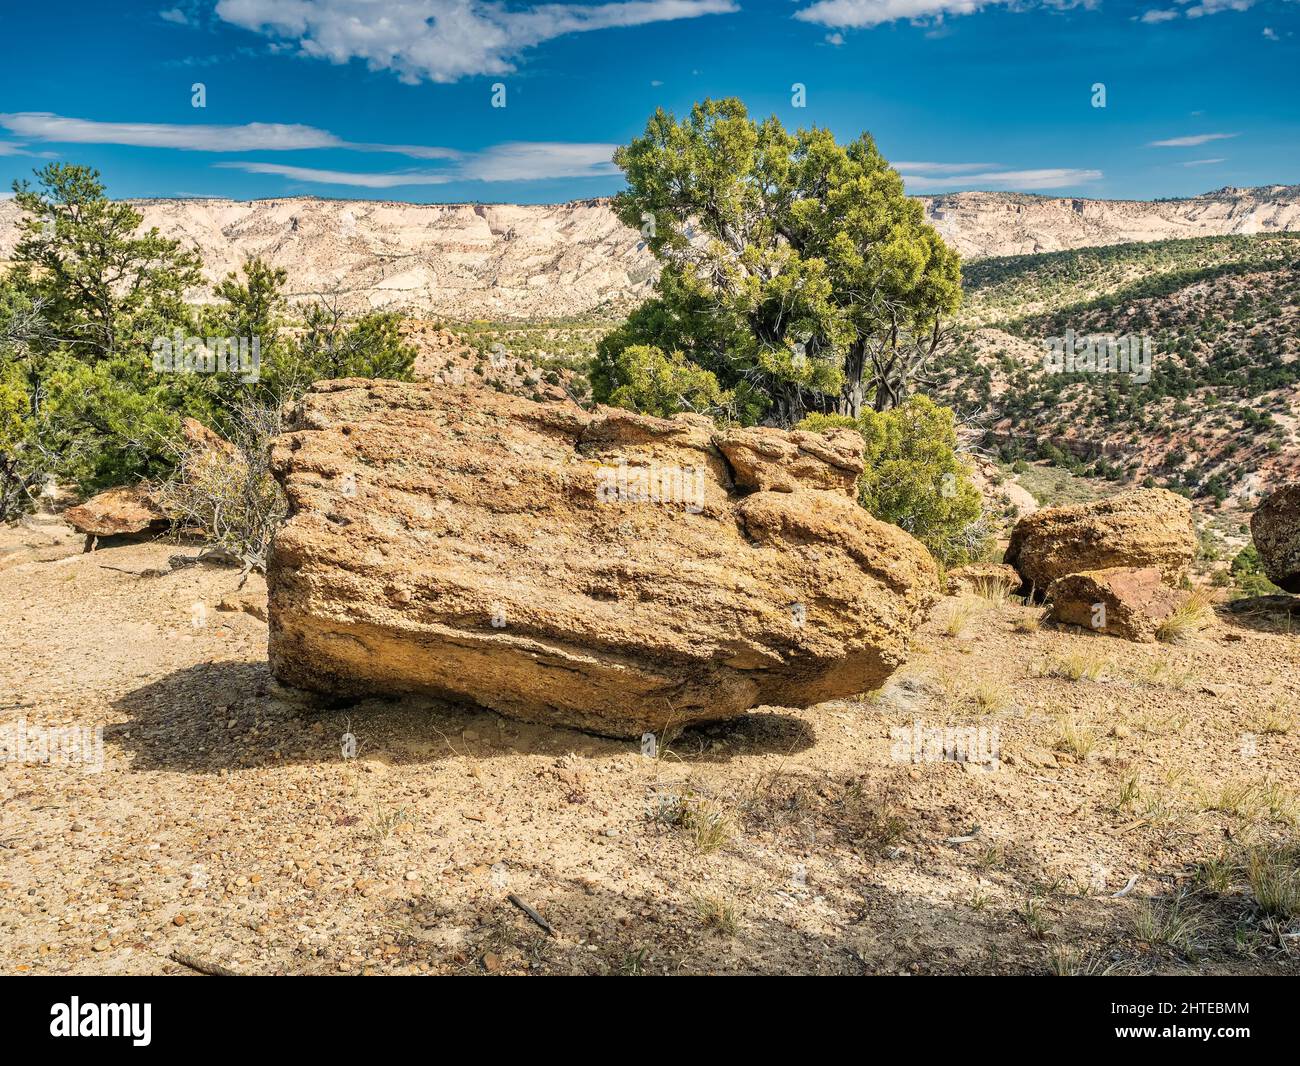 Versteinertes Holz in Escalante Petrified Forest State Park in Utah, USA Stockfoto